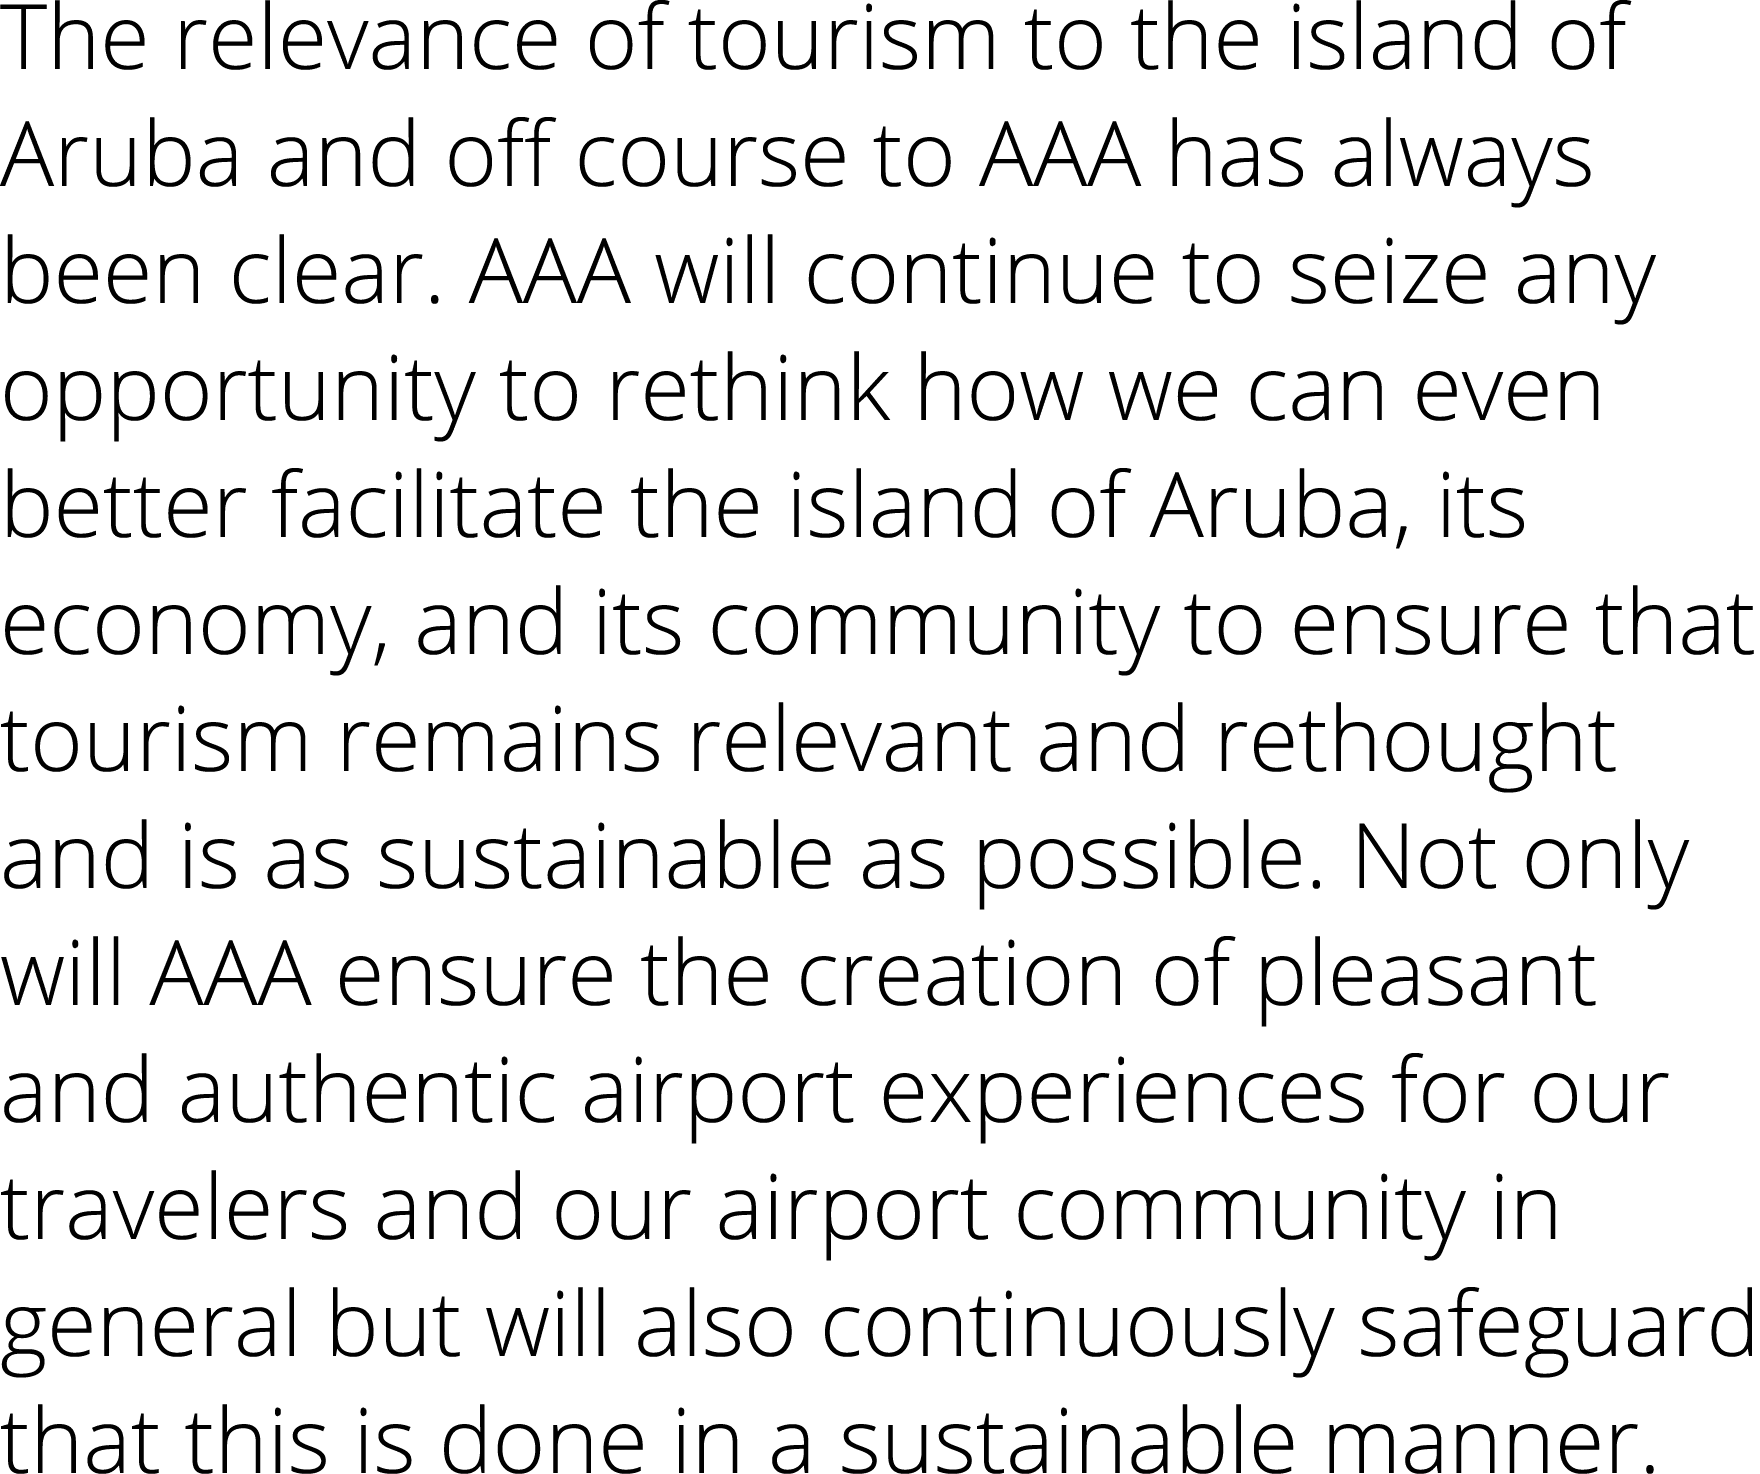 The relevance of tourism to the island of Aruba and off course to AAA has always been clear  AAA will continue to sei   